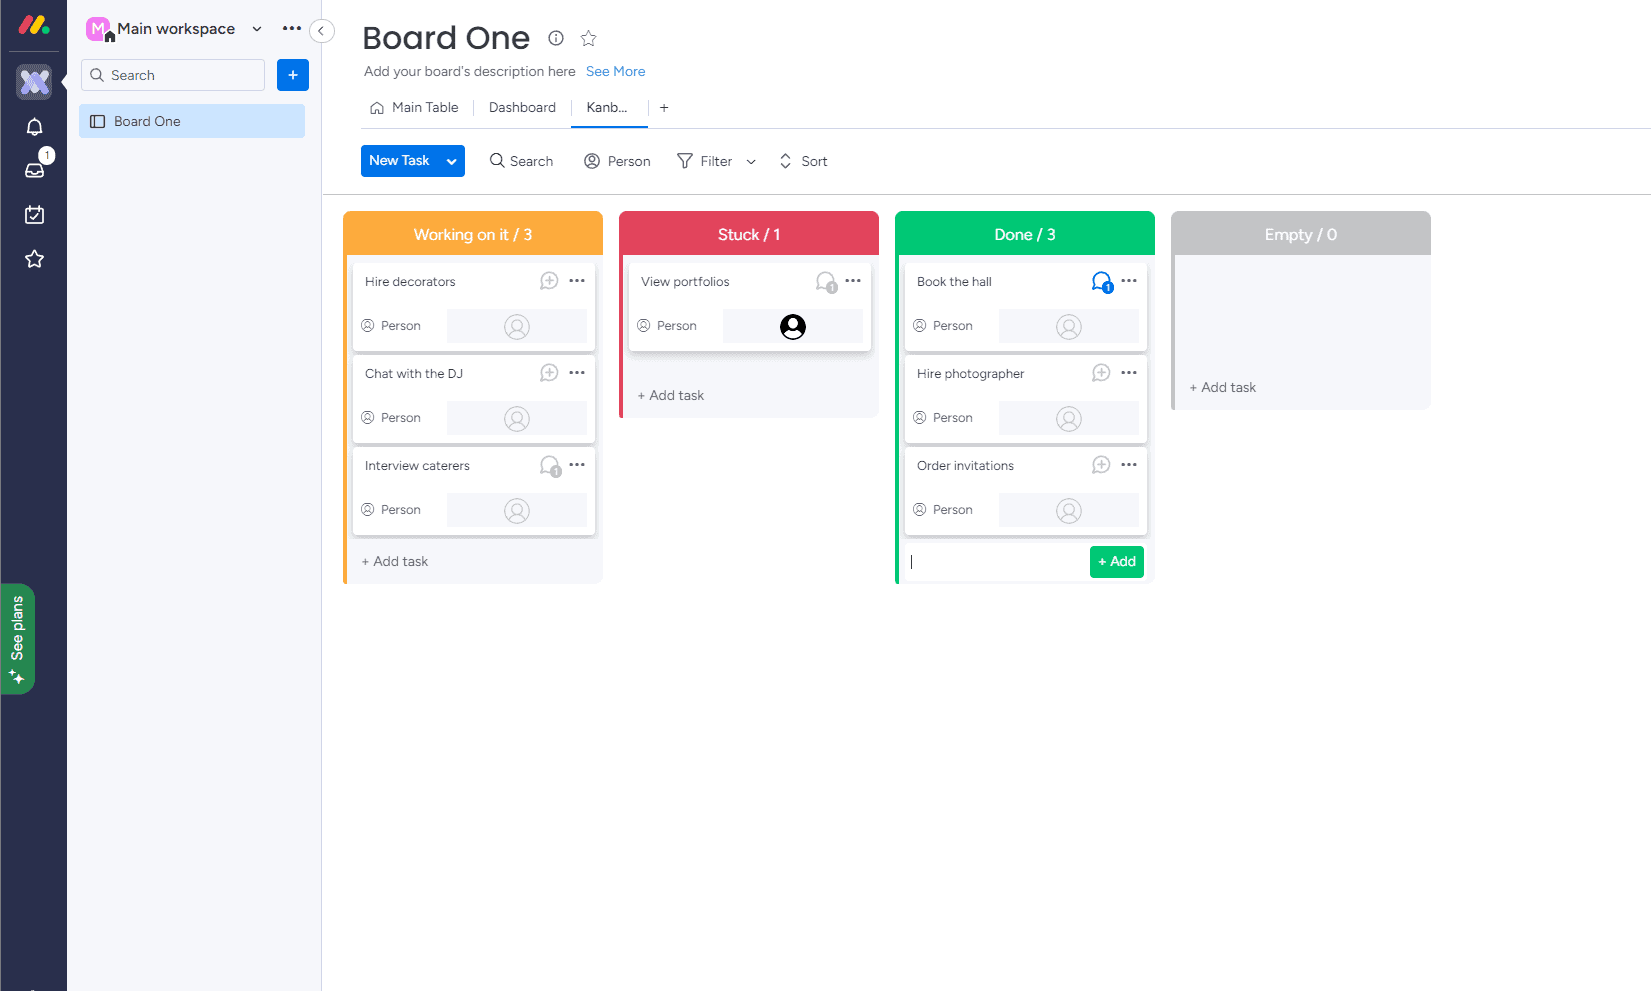 Monday.com board interface showcasing tasks and project management features